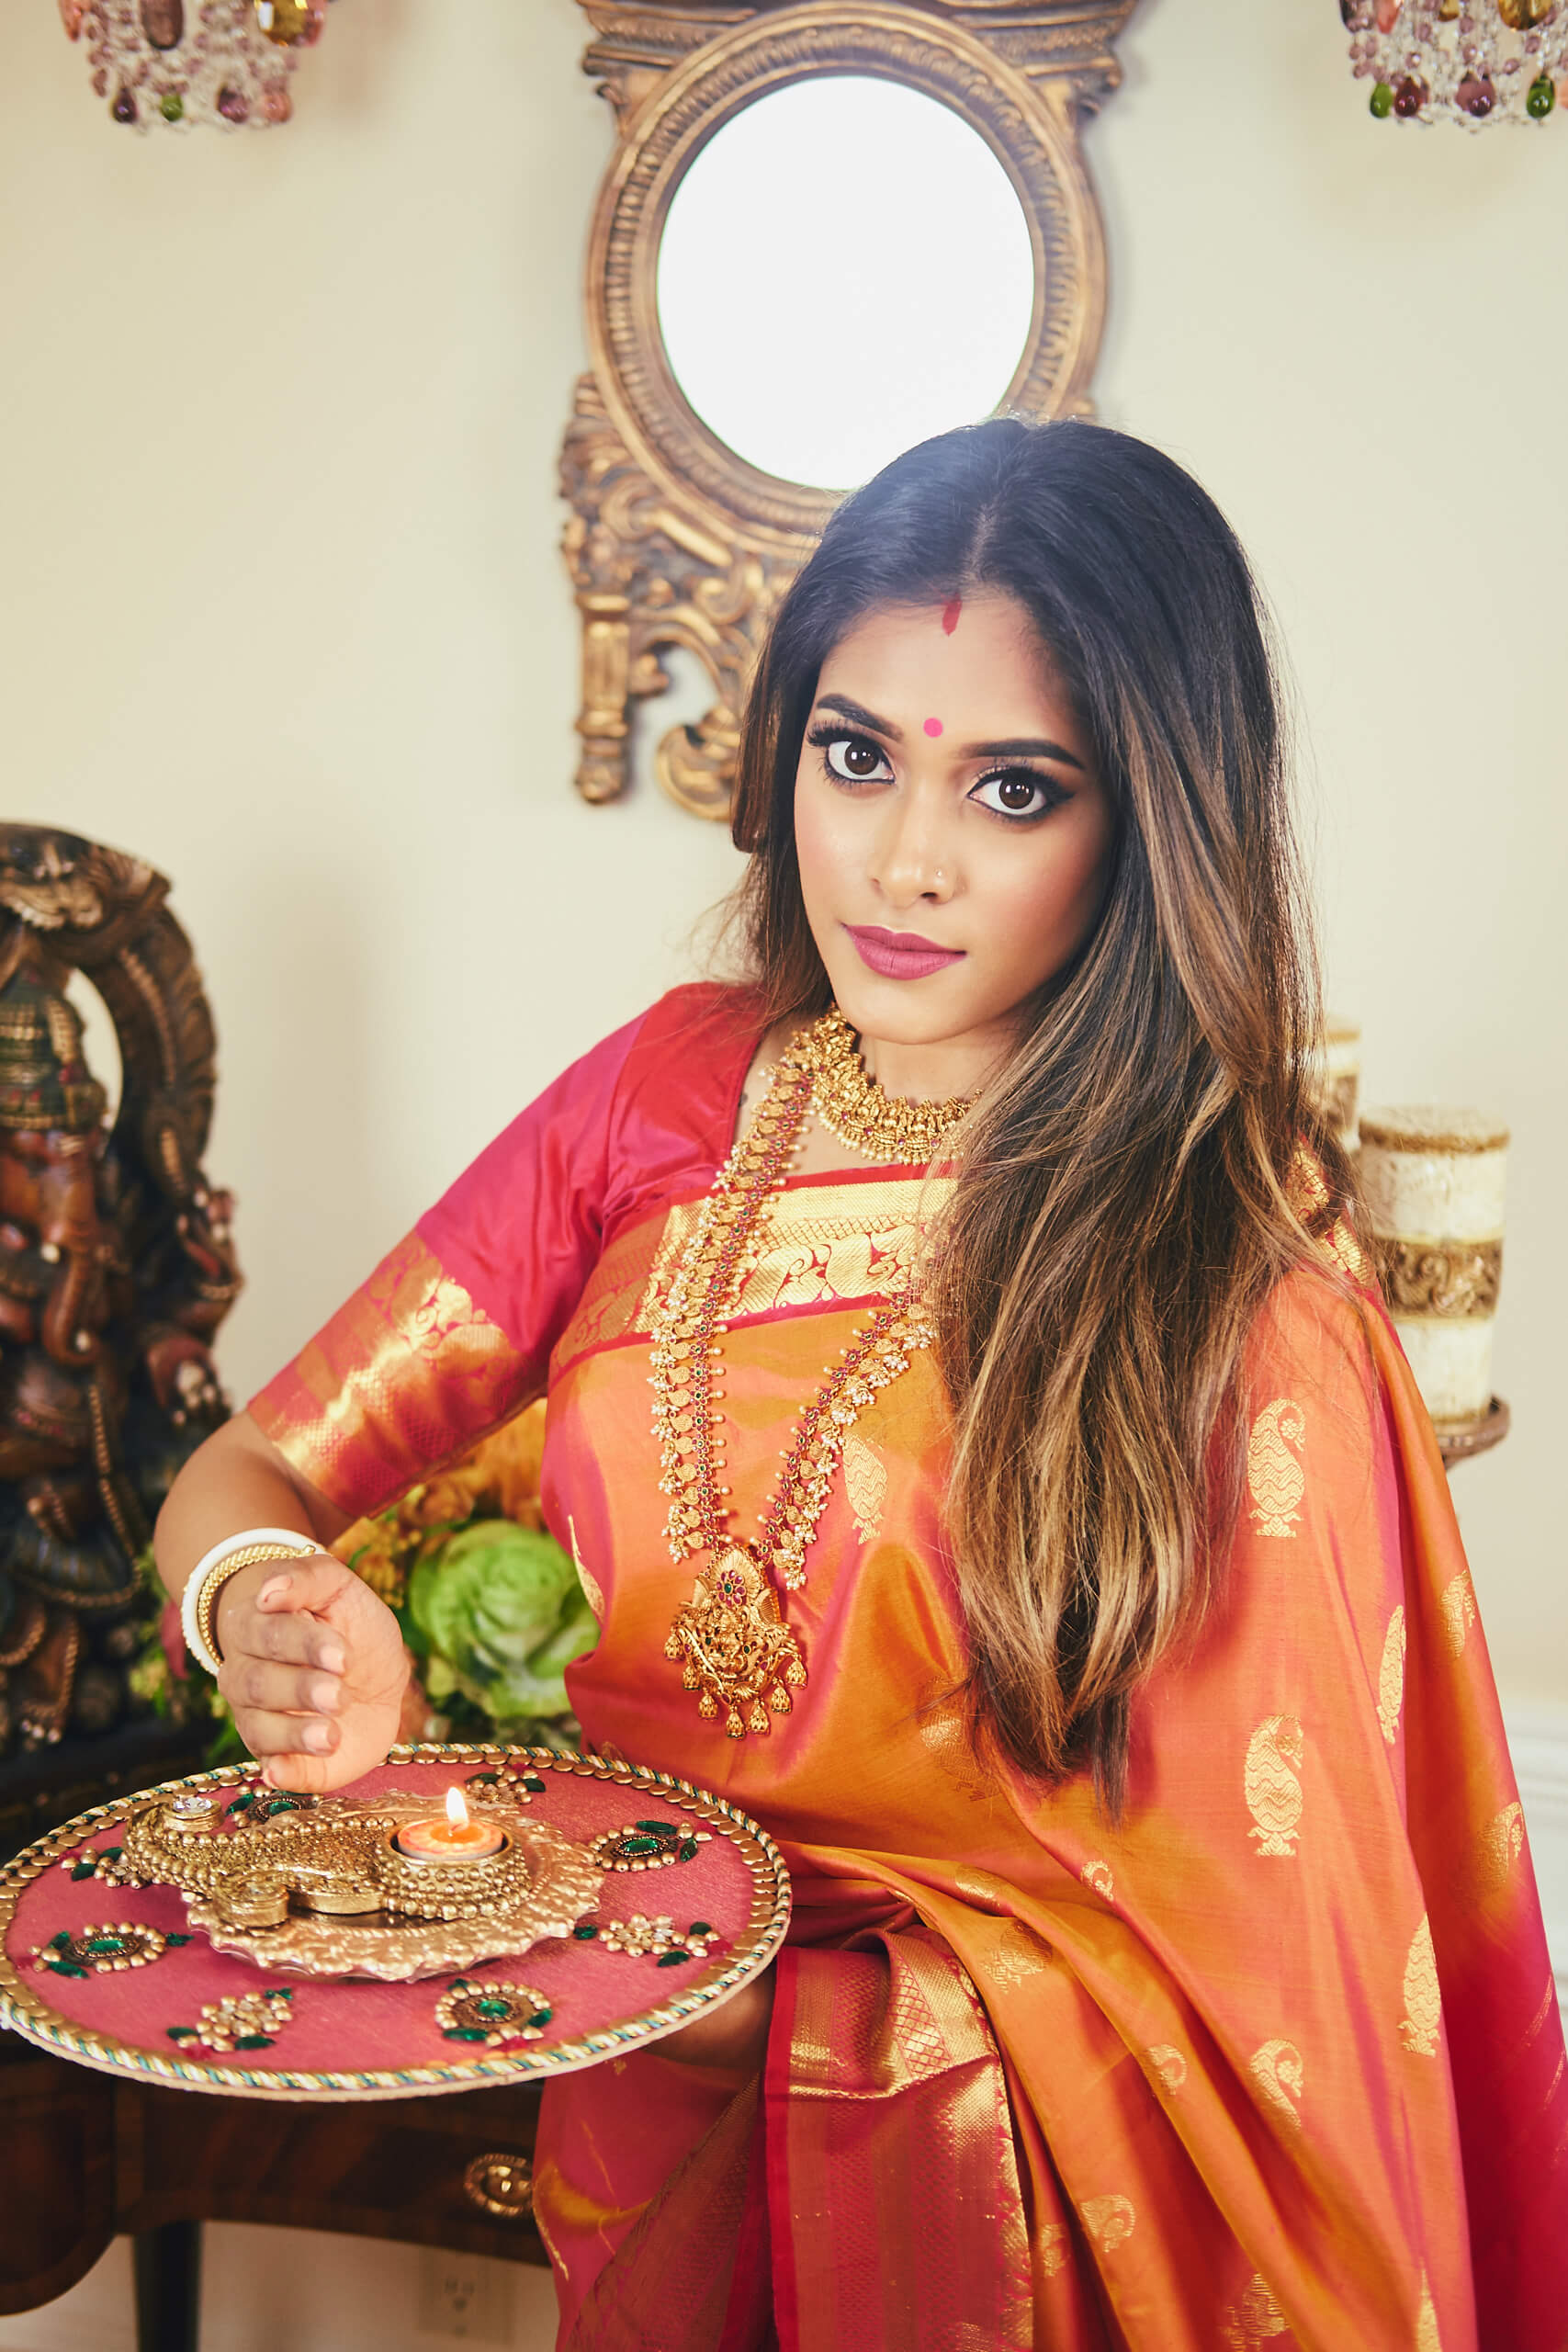 Sumona - Reemat Designs - Indian Jewelry - Indian Fashion - Lifestyle Photography -Portrait Photography - Englewood New Jersey